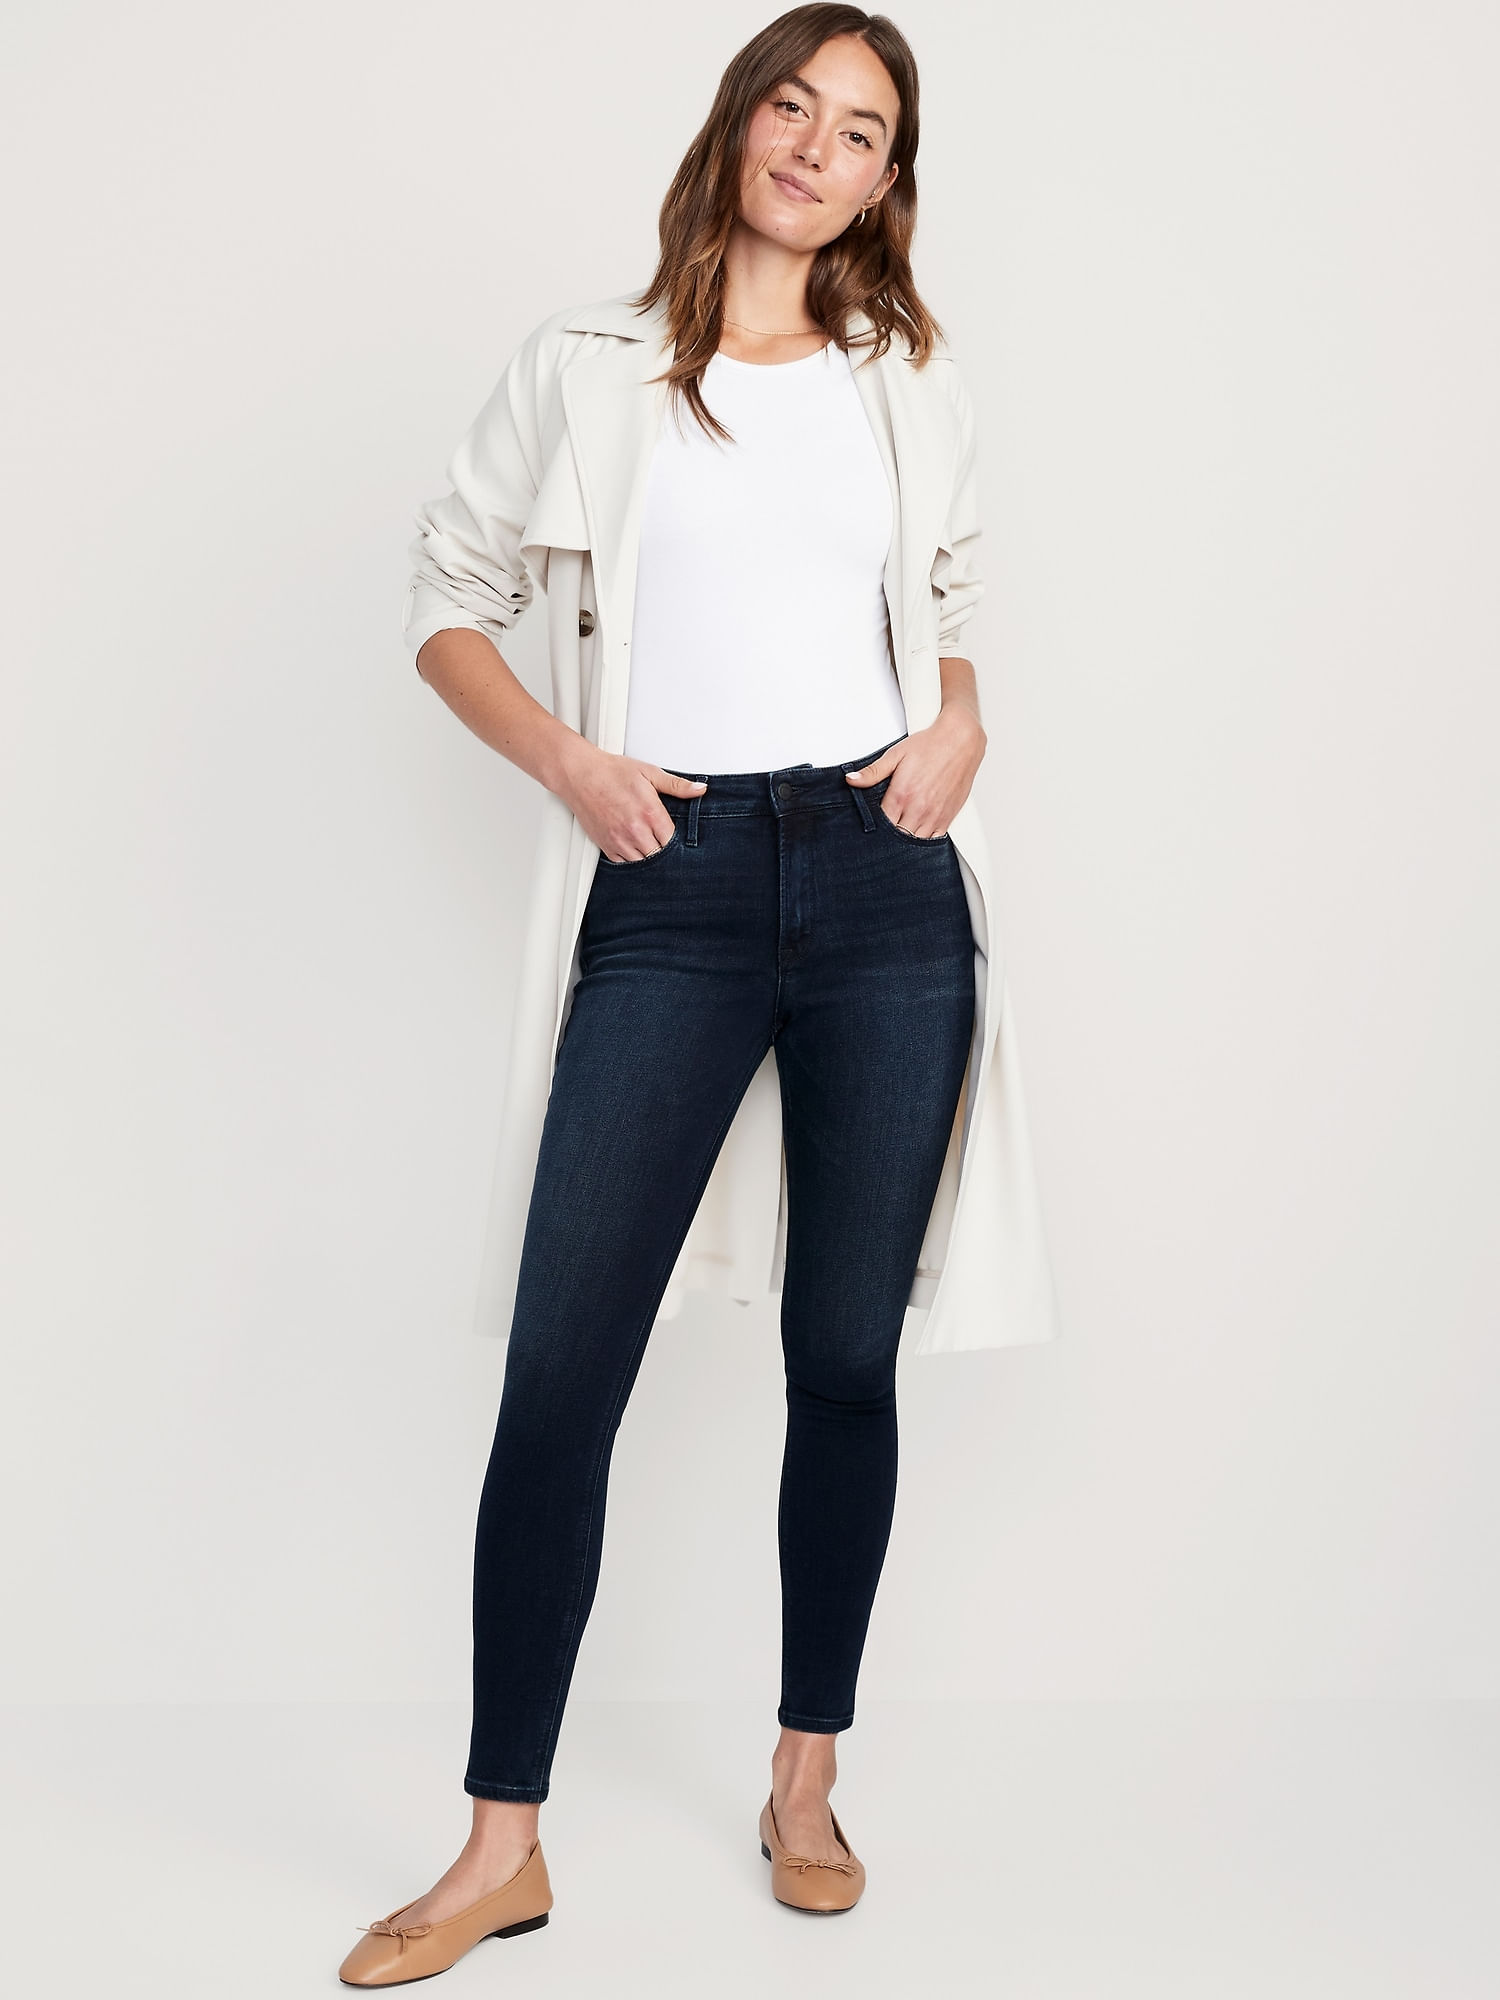 Jeans Old Navy High-Waisted Super-Skinny para Mujer | Old Navy - Old Navy MX